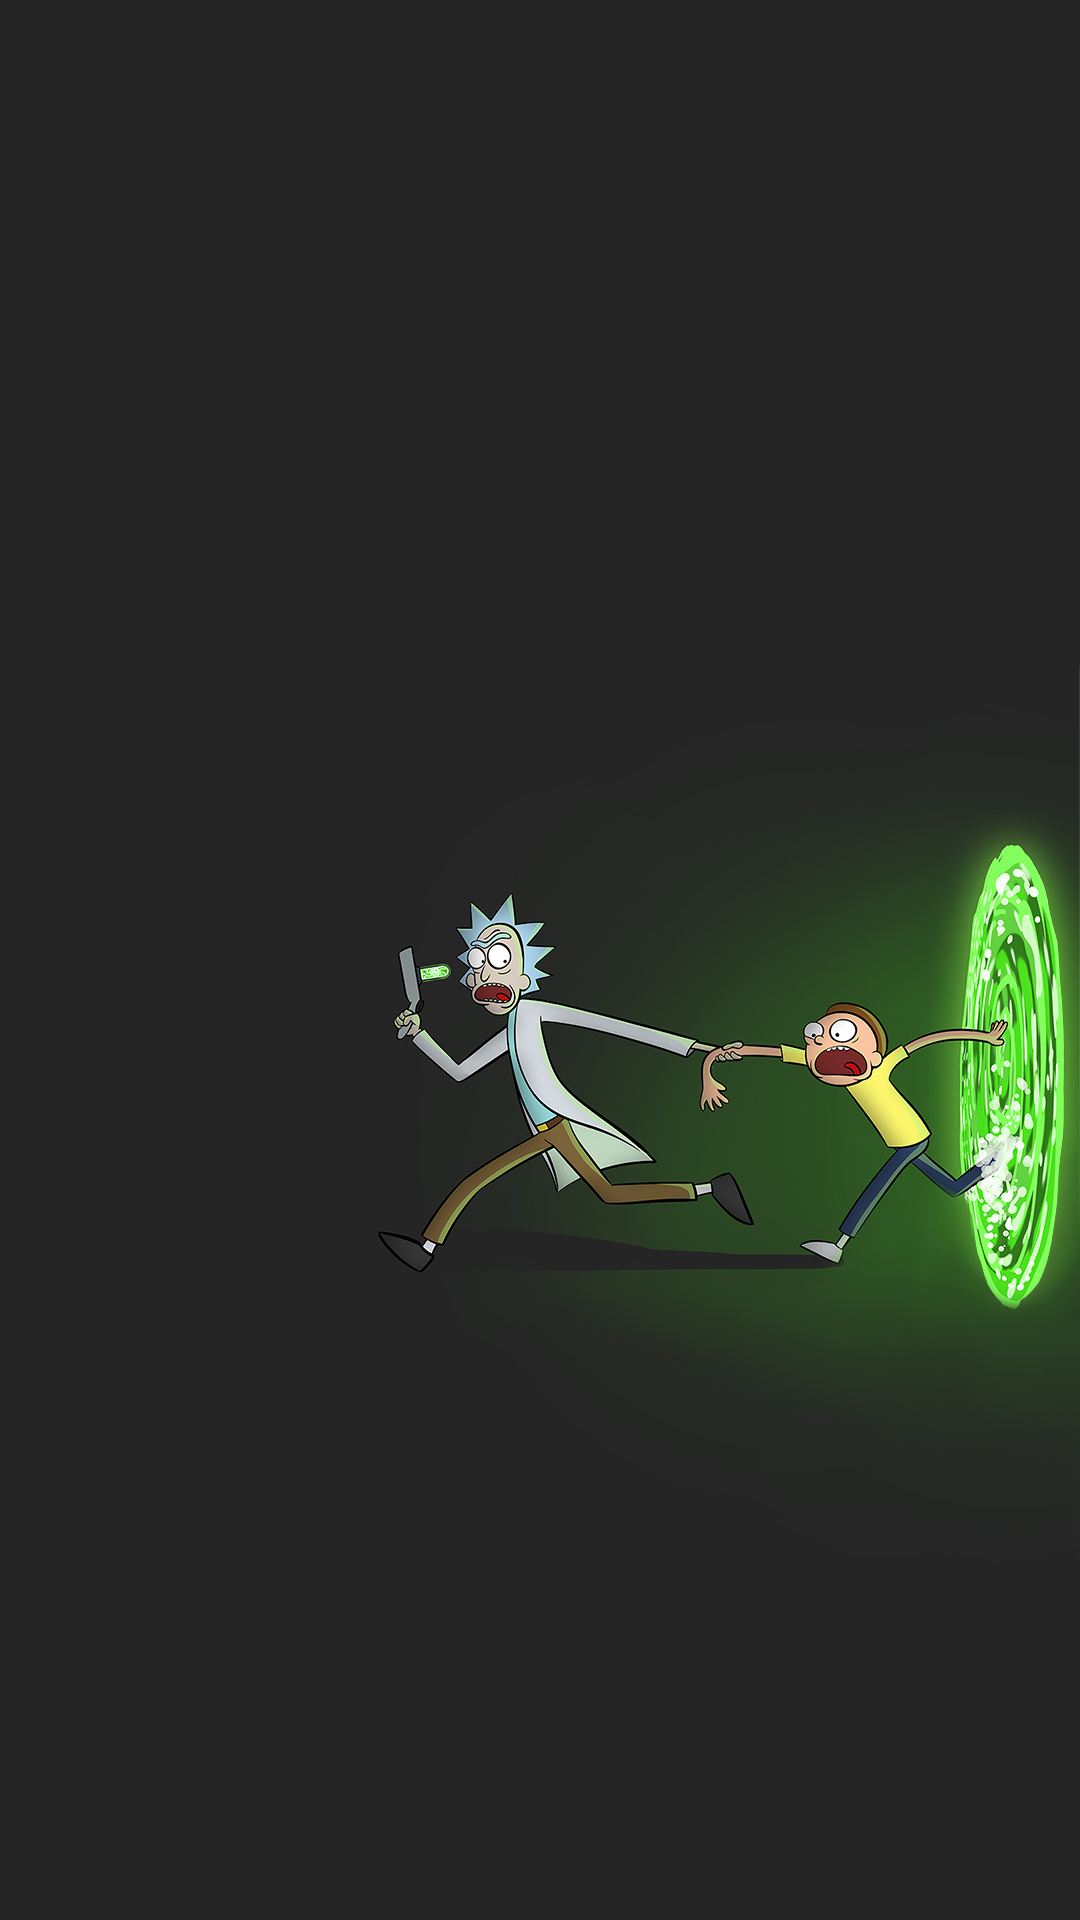 Rick and Morty iPhone Wallpaper 3D iPhone Wallpaper